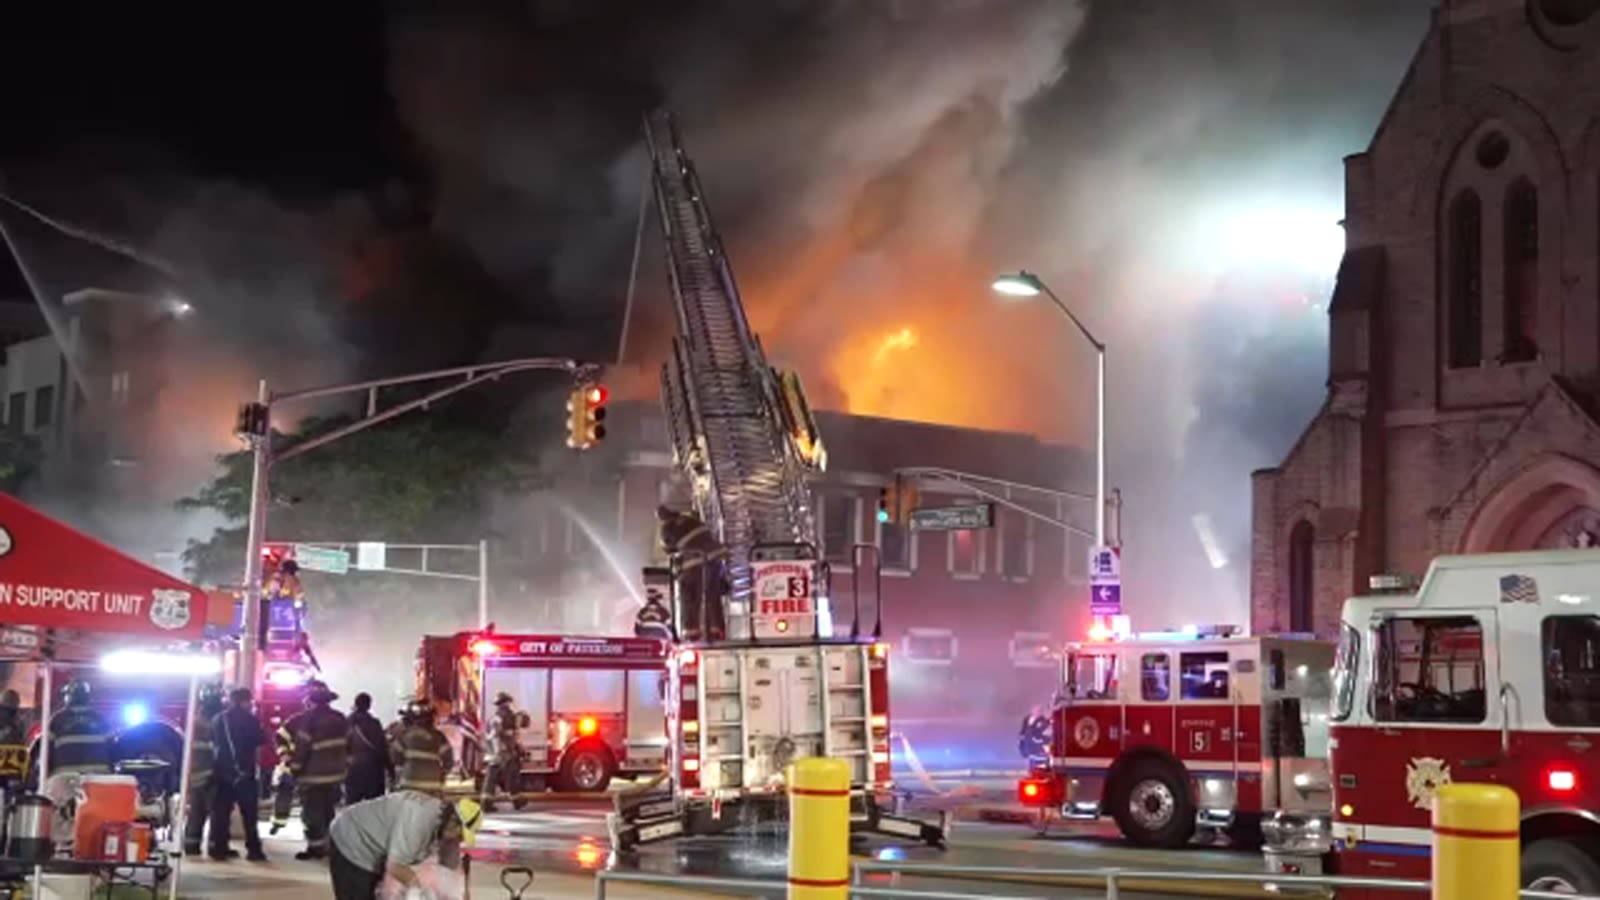 Massive fire rips through building in Paterson, New Jersey